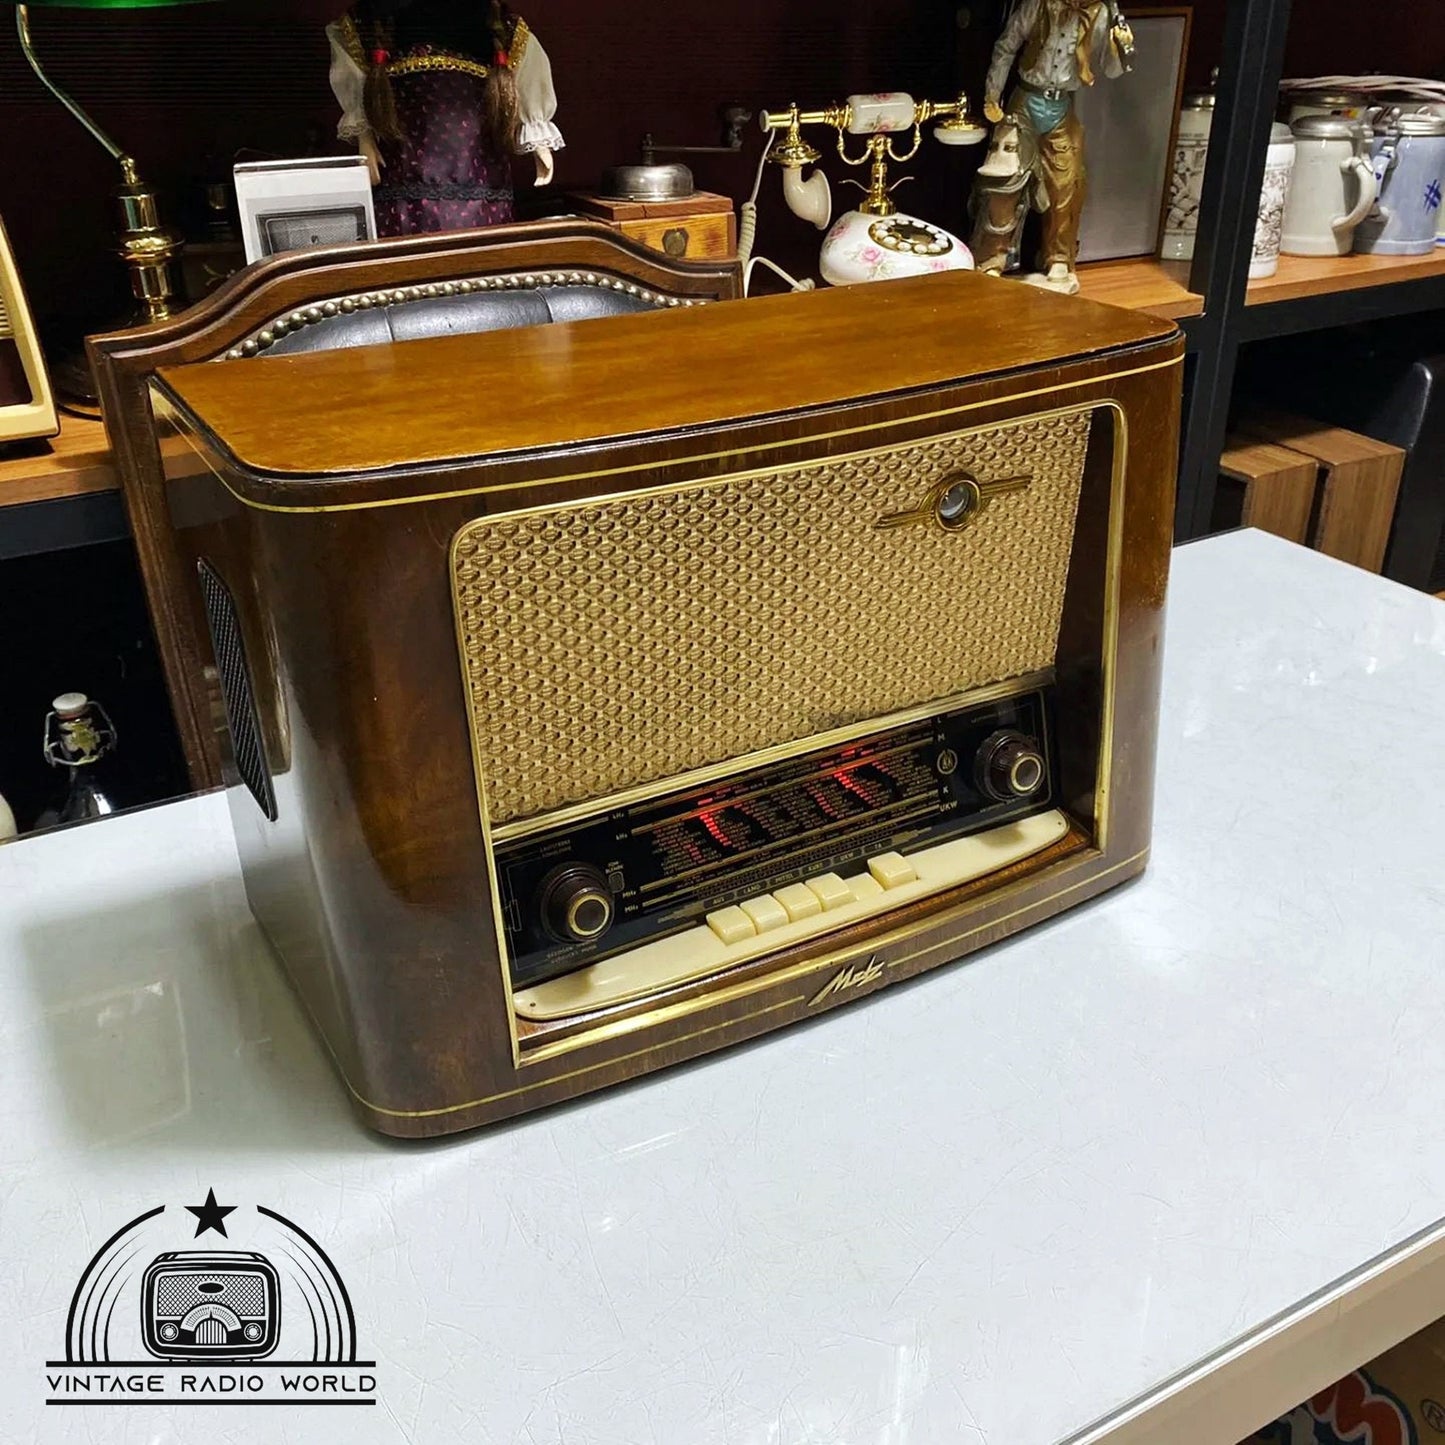 Metz Vintage Radio - Classic Design with Timeless Appeal and Lamp Feature